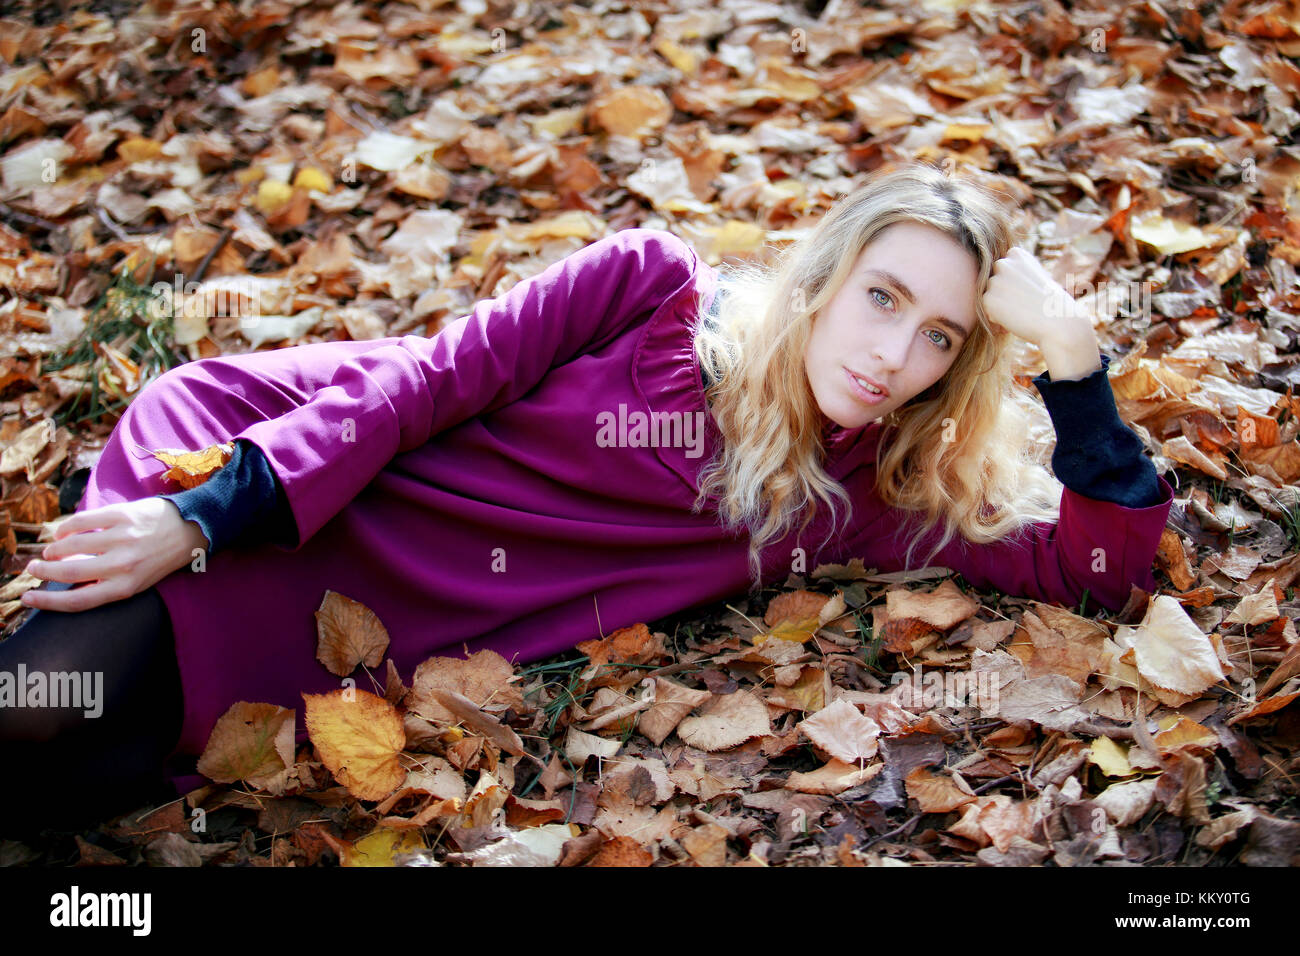 Blonde girl distracted between dry autumn leaves, gorgeous portrait, looking at camera. Stock Photo